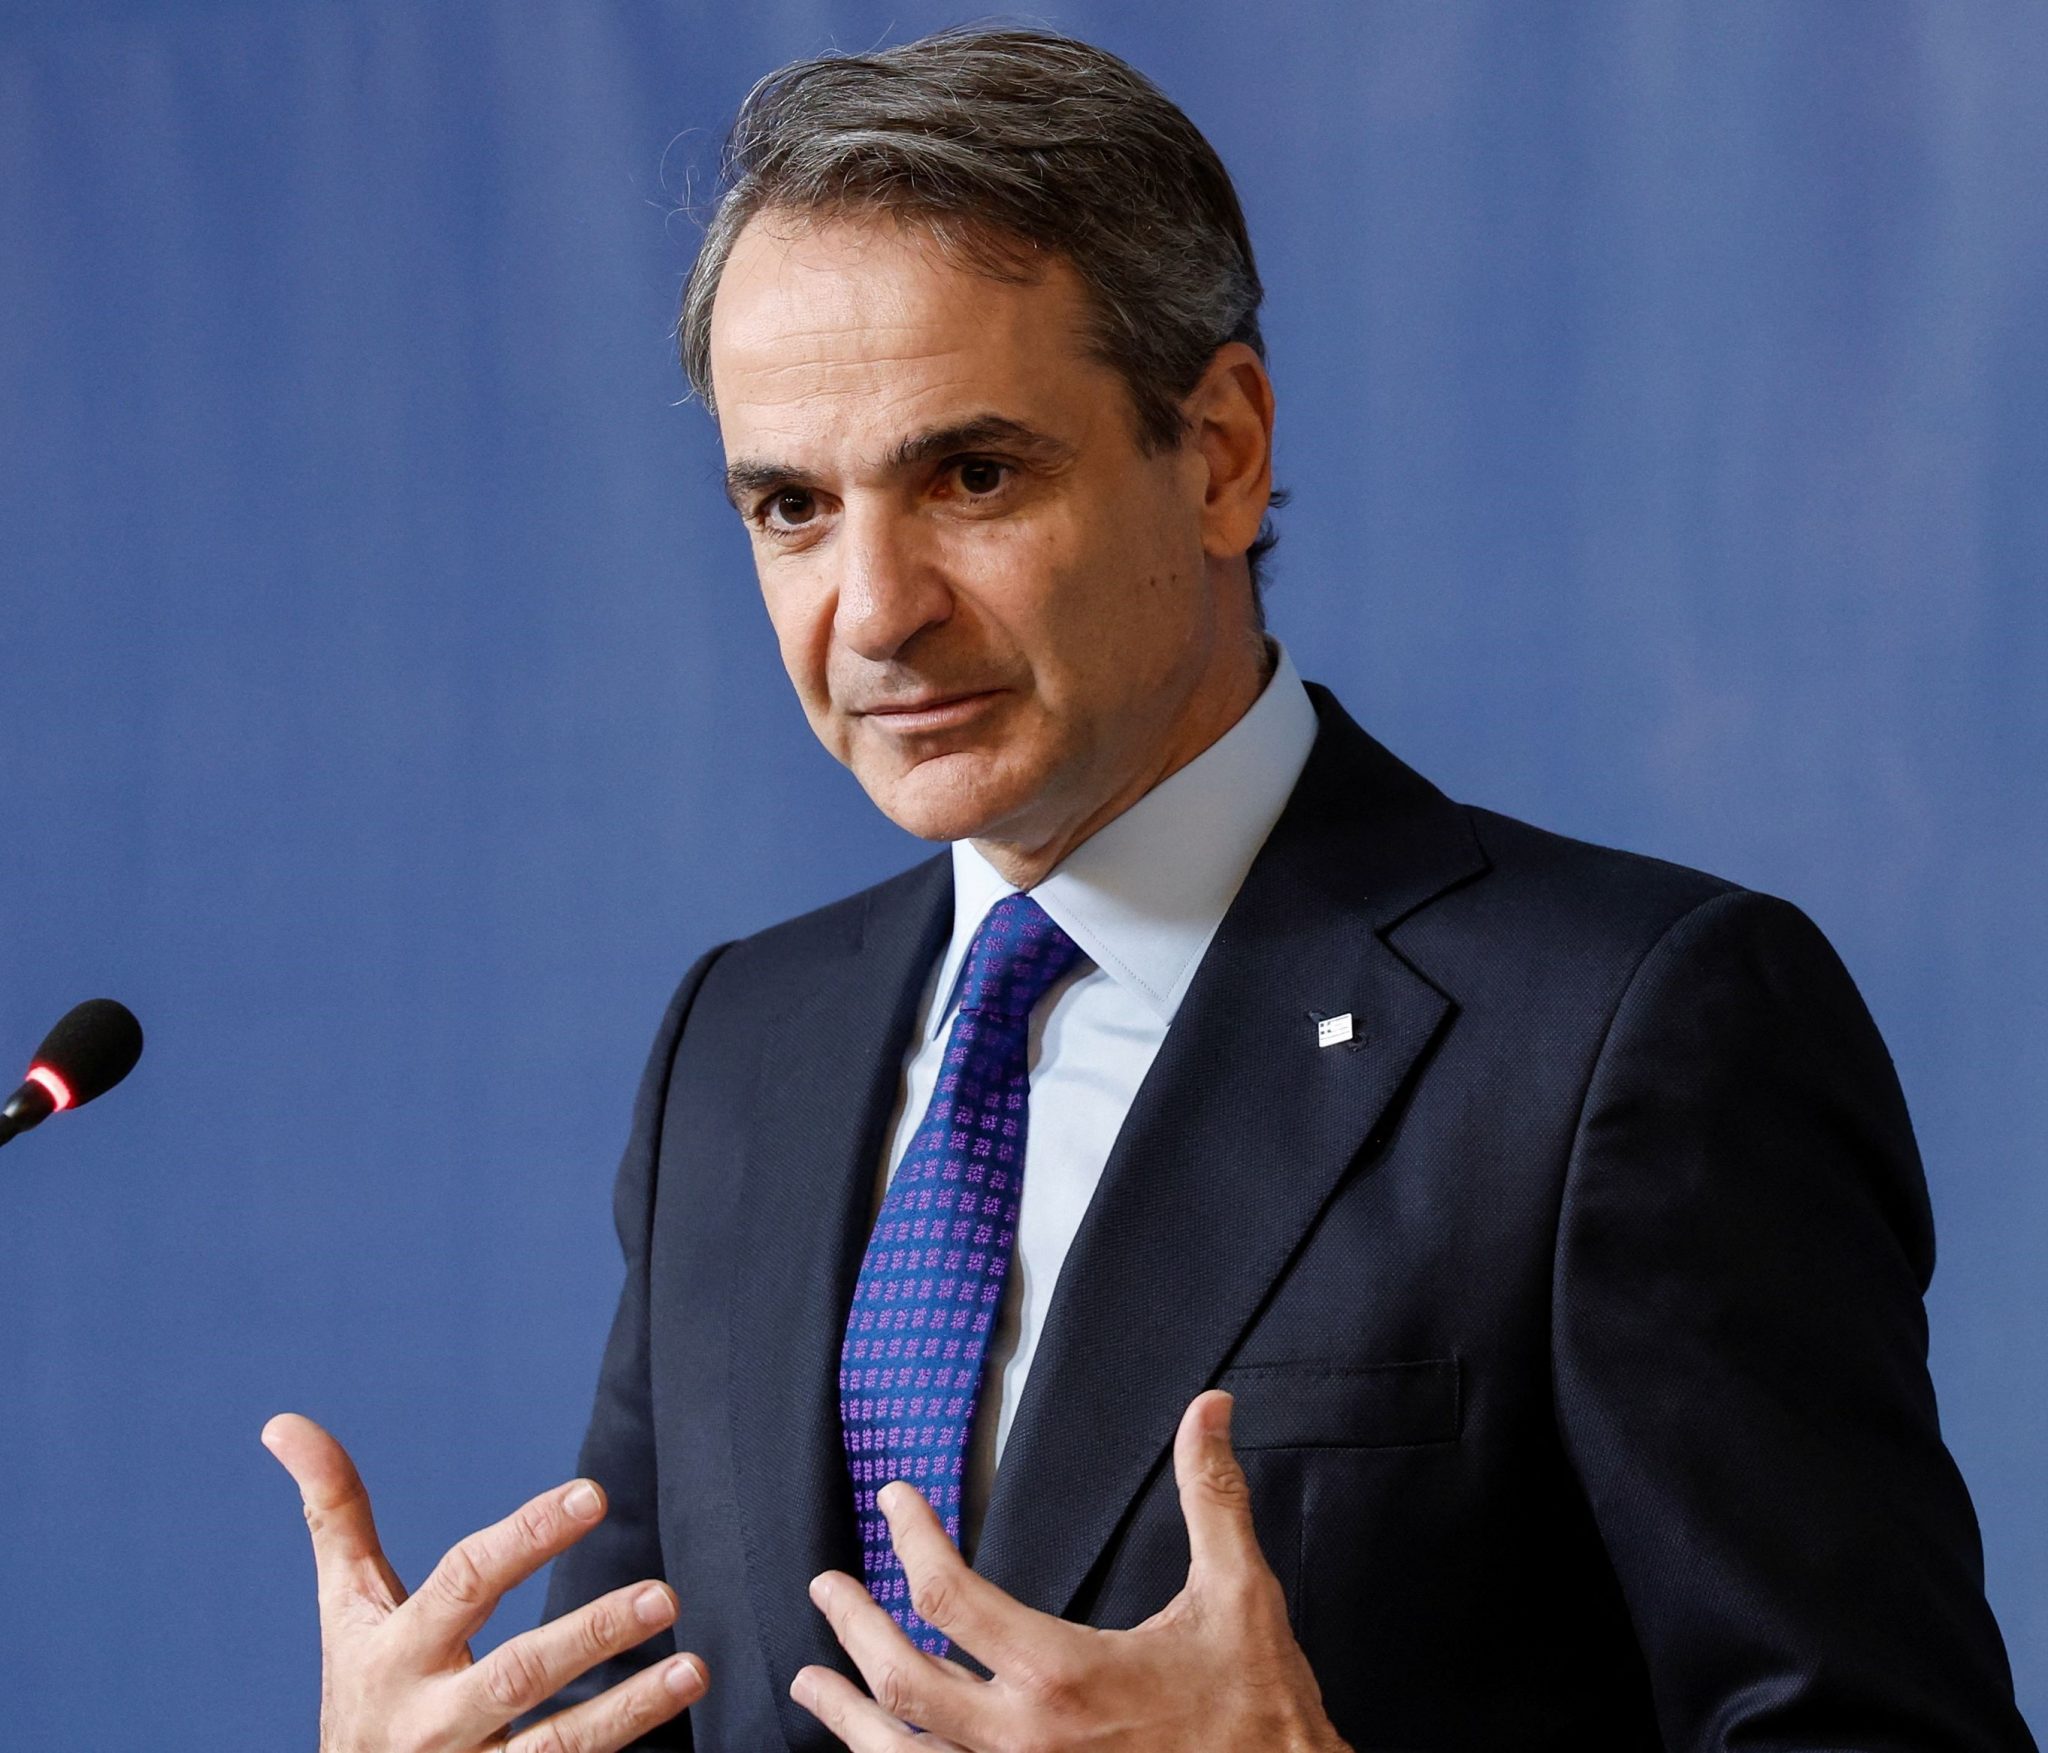 PM Mitsotakis: “Greece is not a Banana Republic”